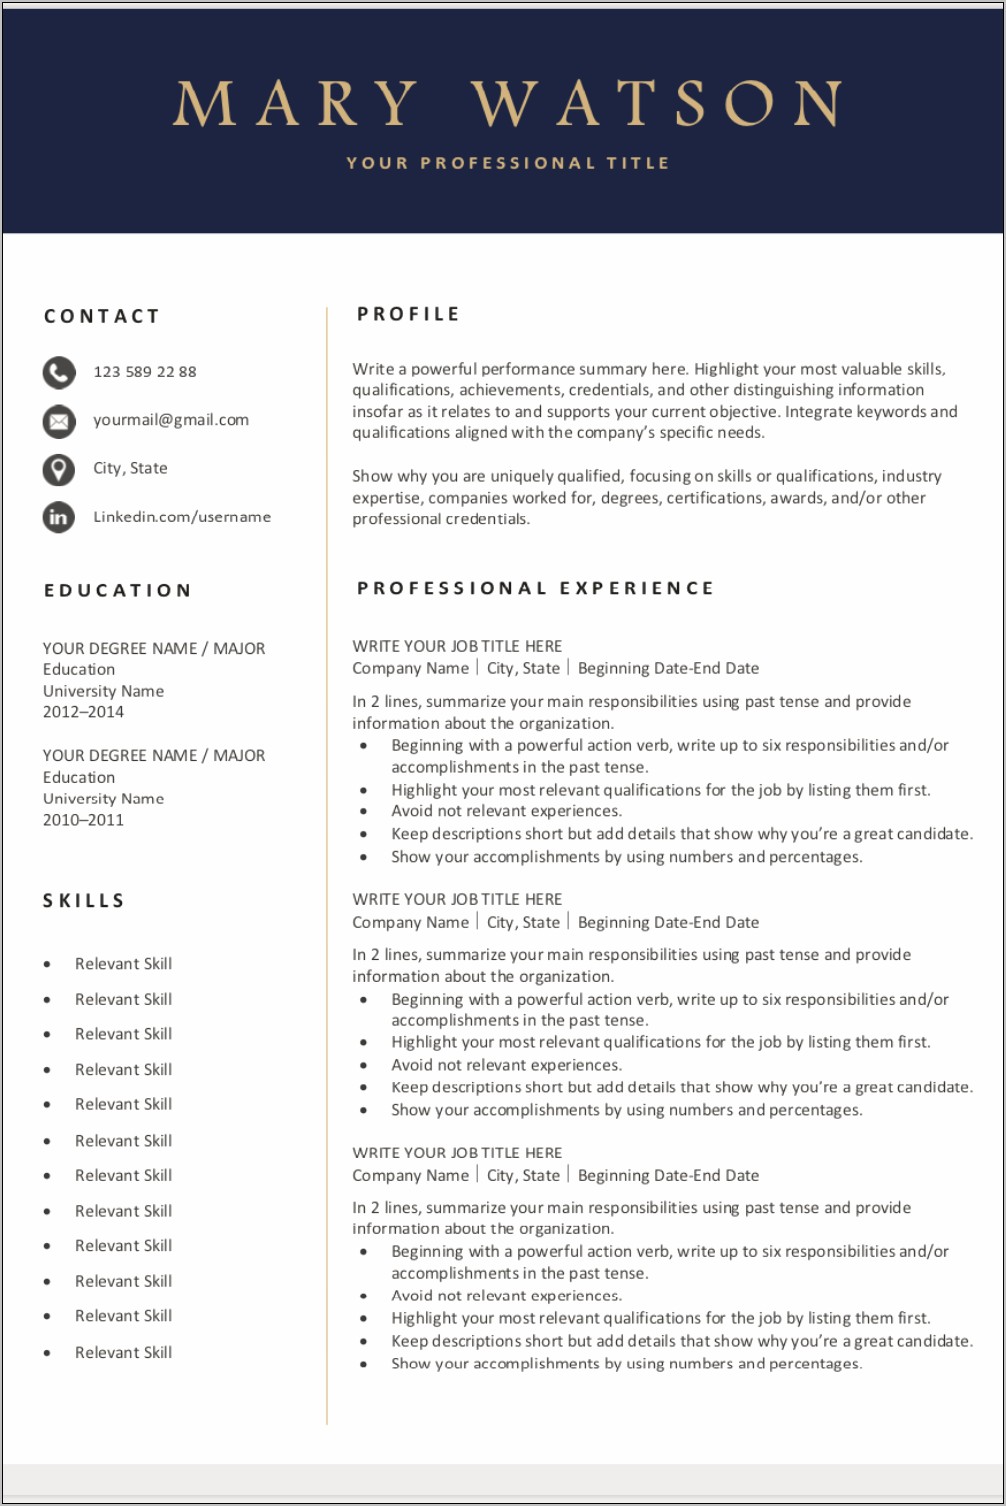 Resume Template For Job Search